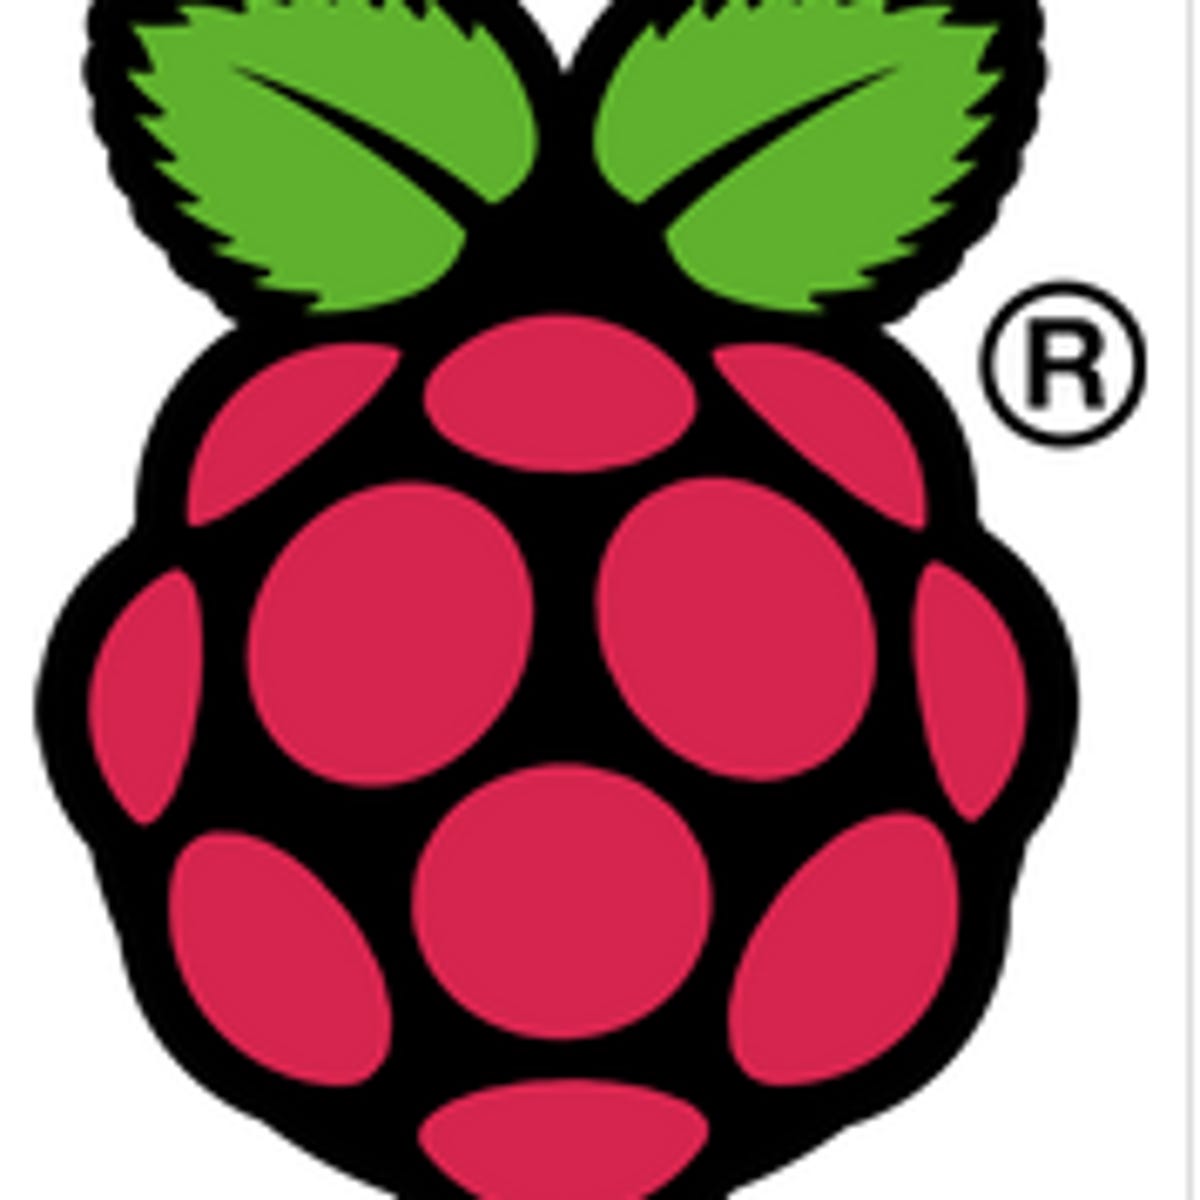 NOOBS Archives - Raspberry Pi